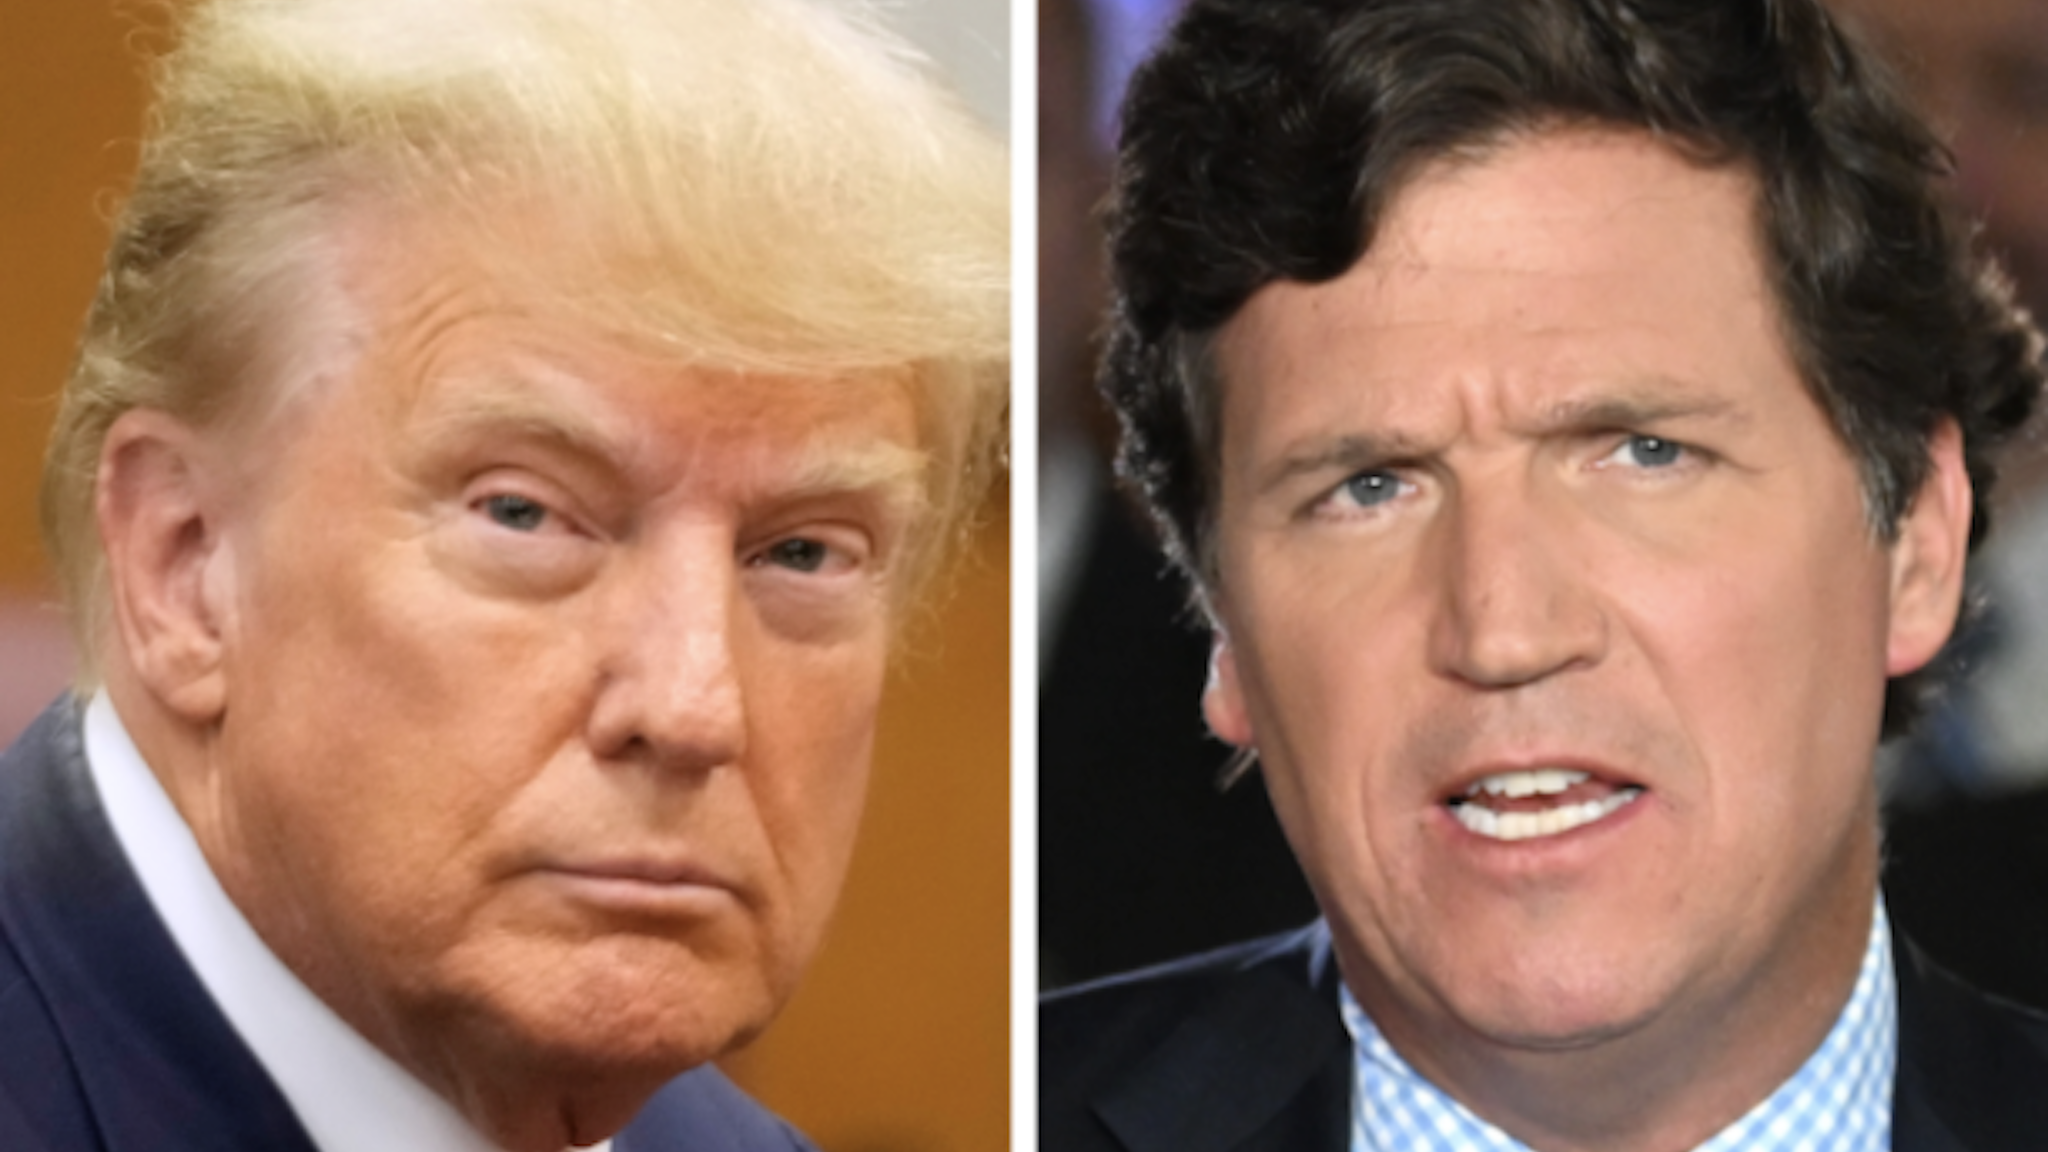 Former President Donald Trump sat down with Tucker Carlson for a recent interview